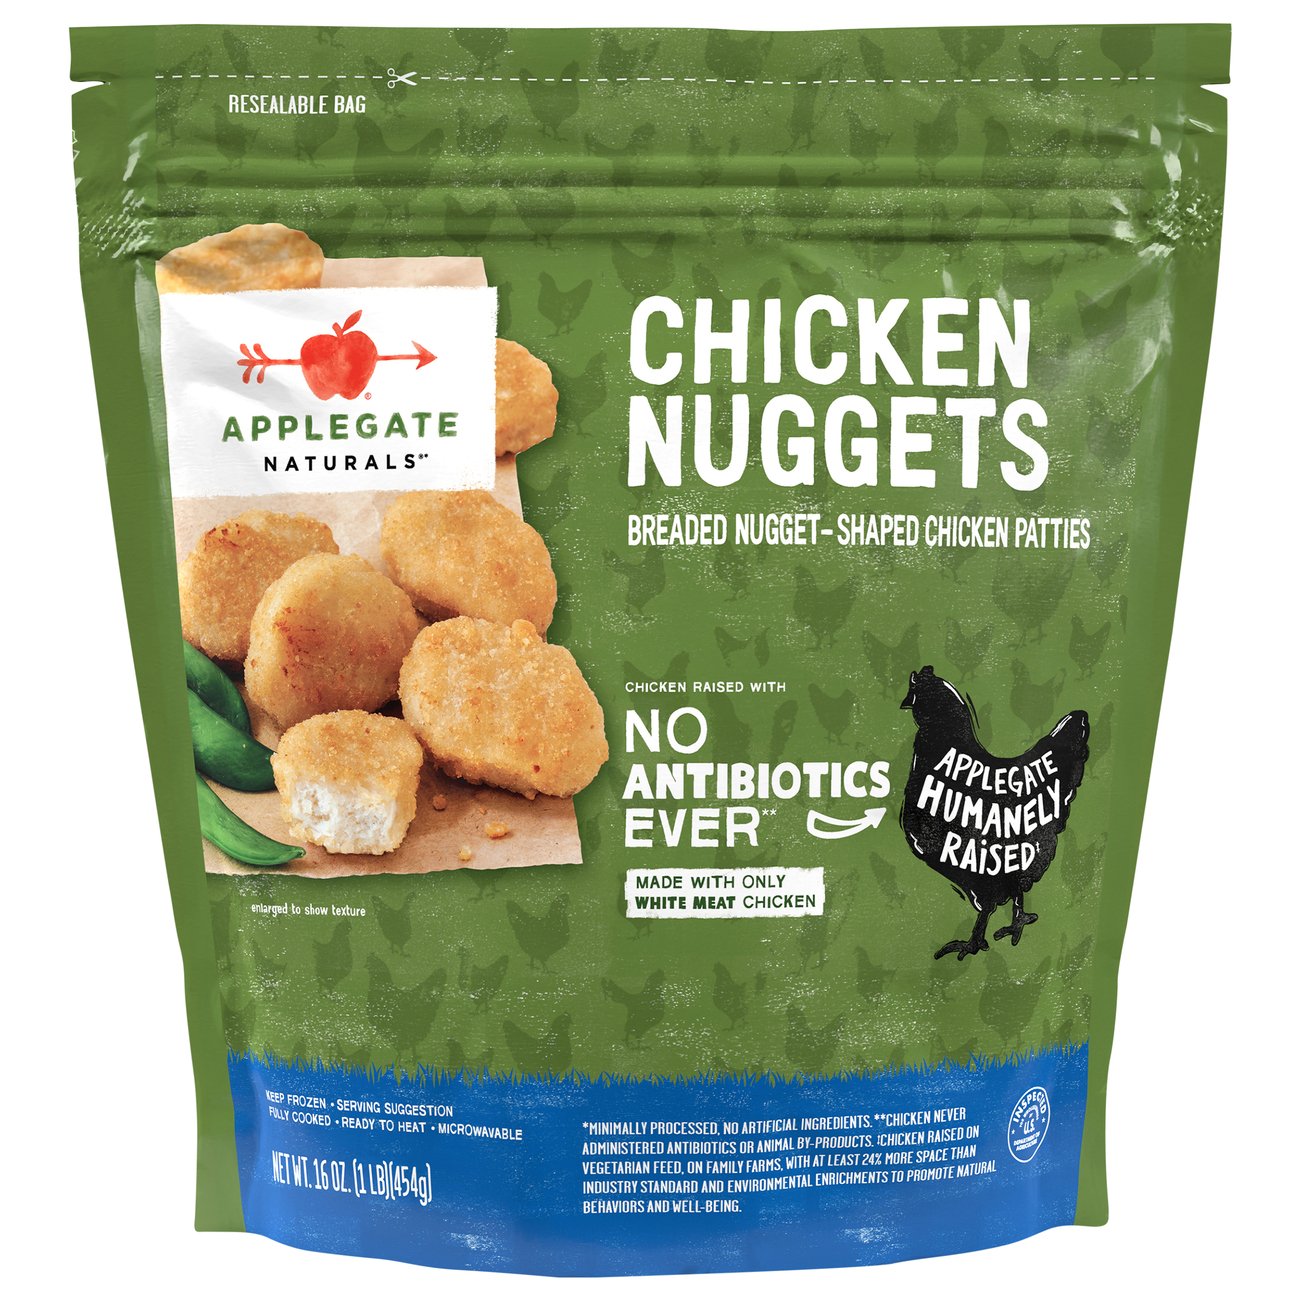 Applegate Natural Chicken Nuggets Family Size - Shop Chicken at H-E-B